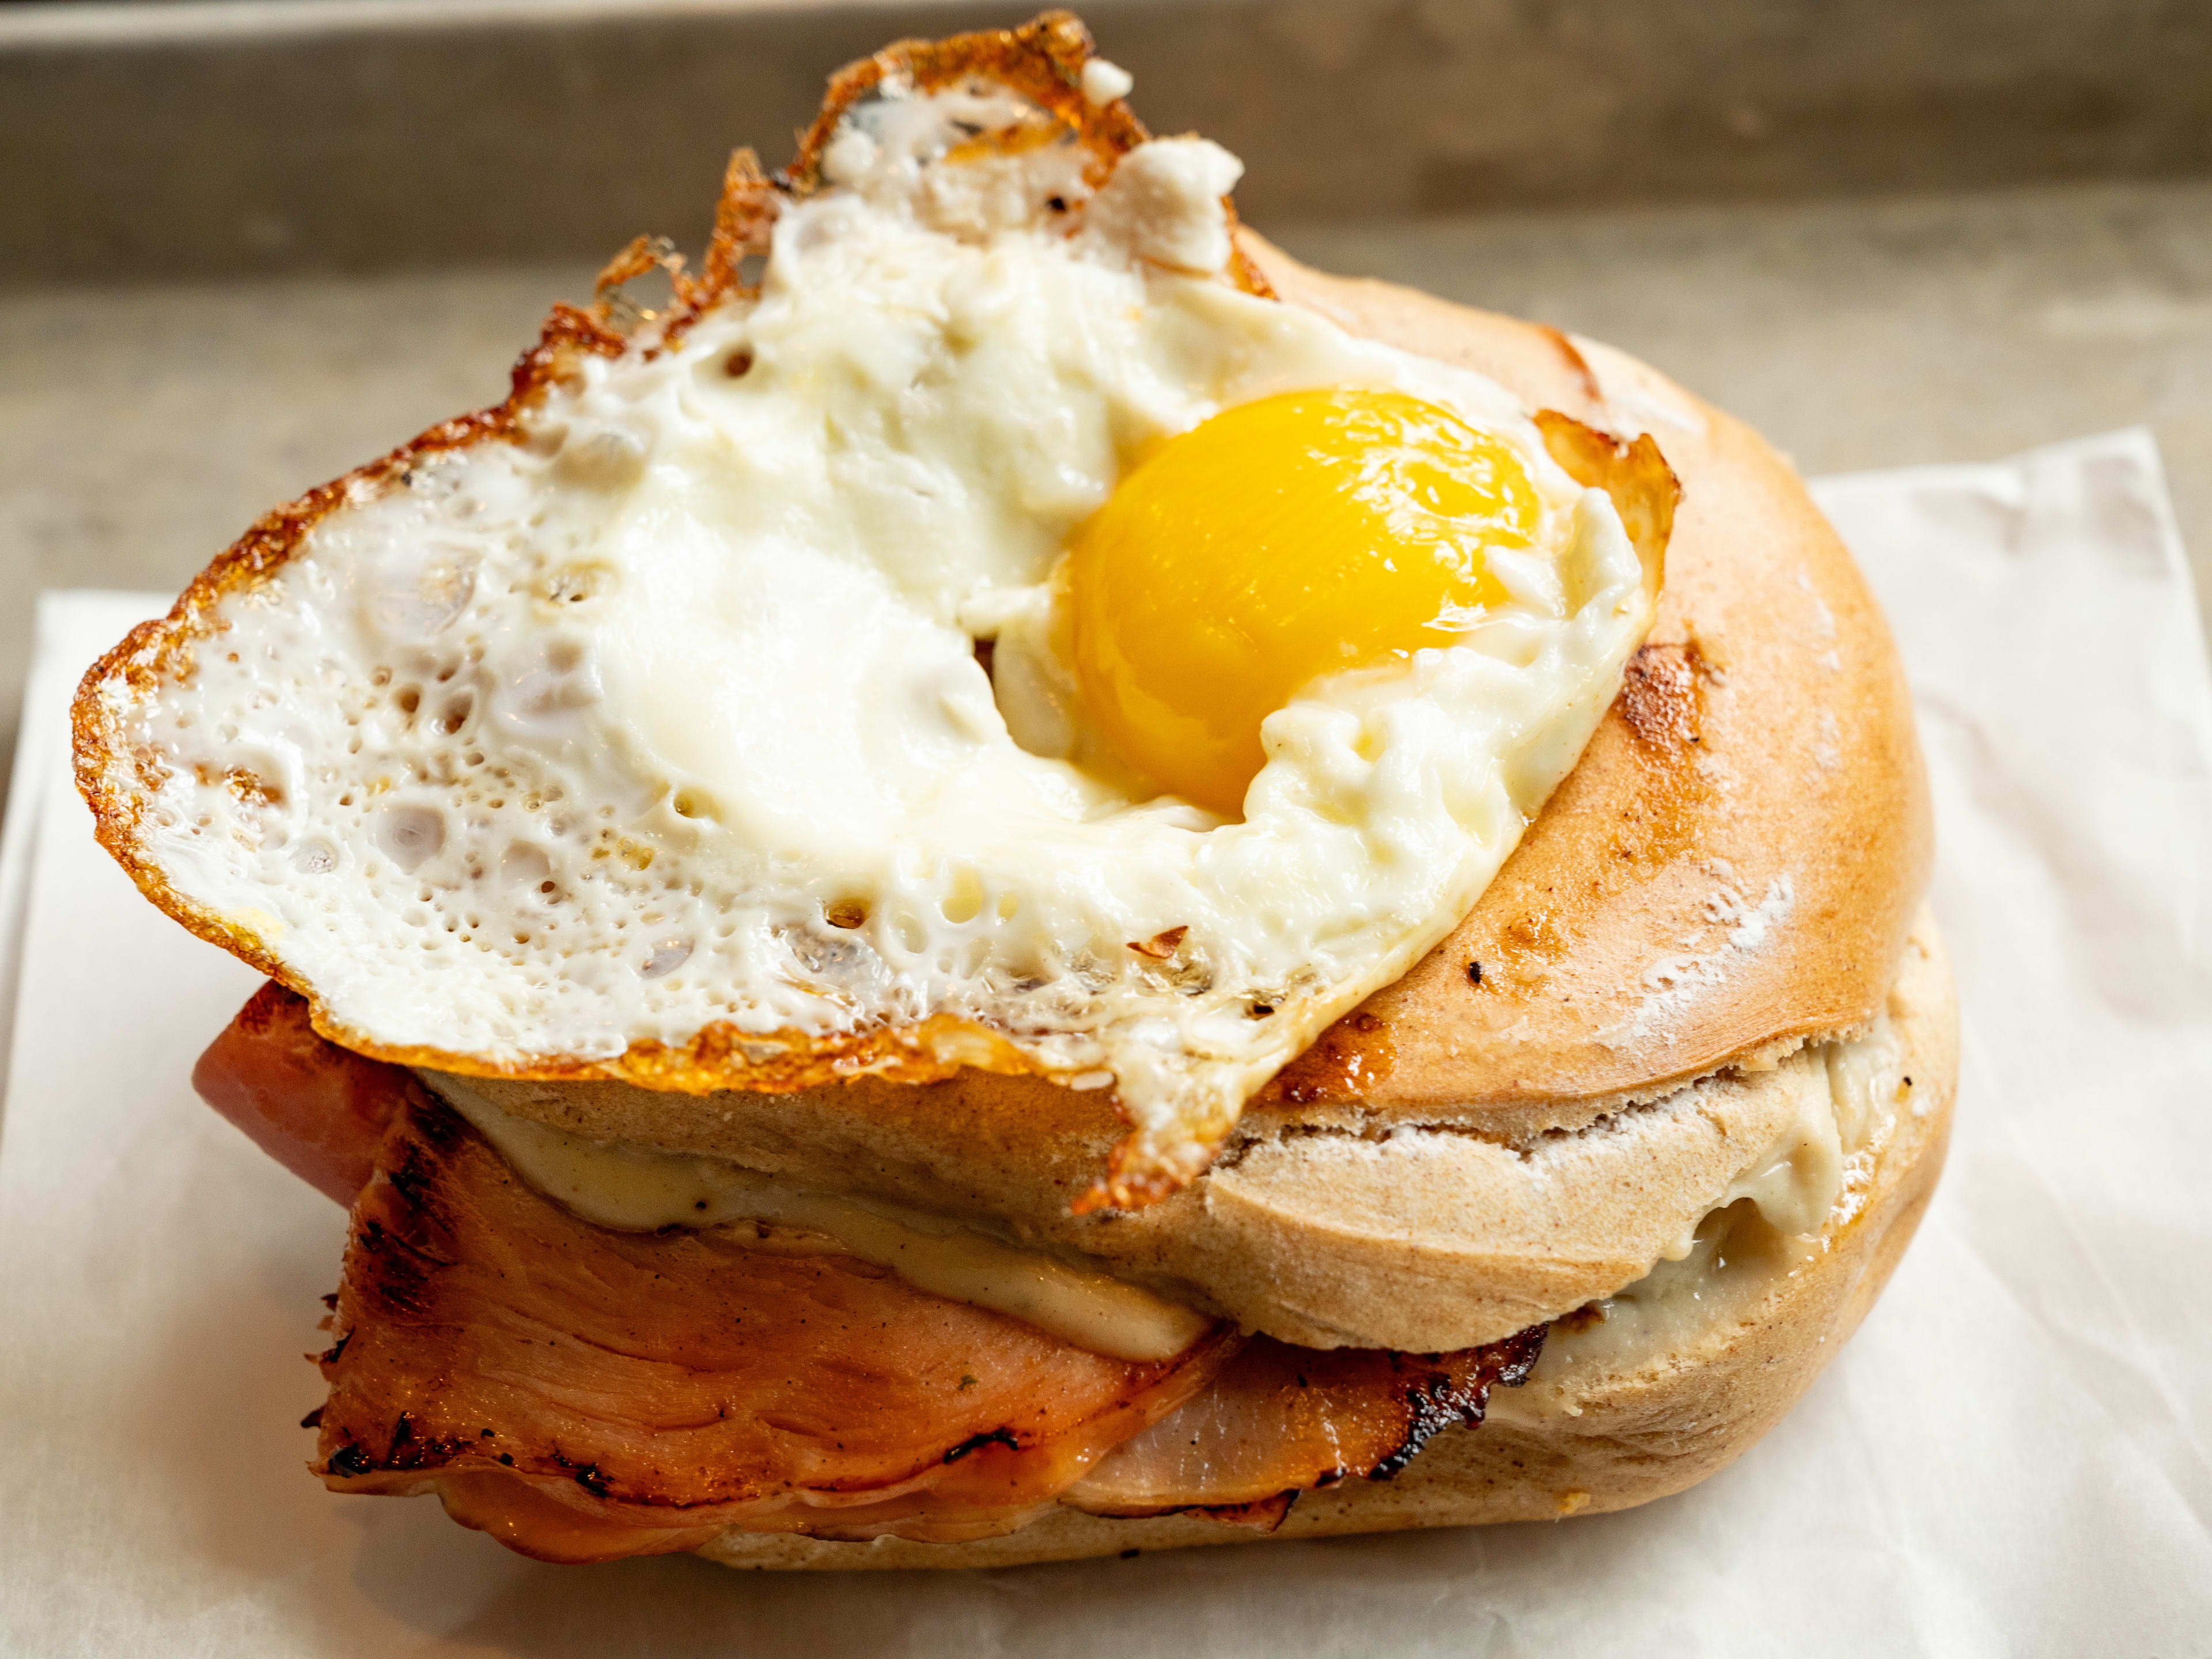 This is a croque Madame from The Bagel Place.